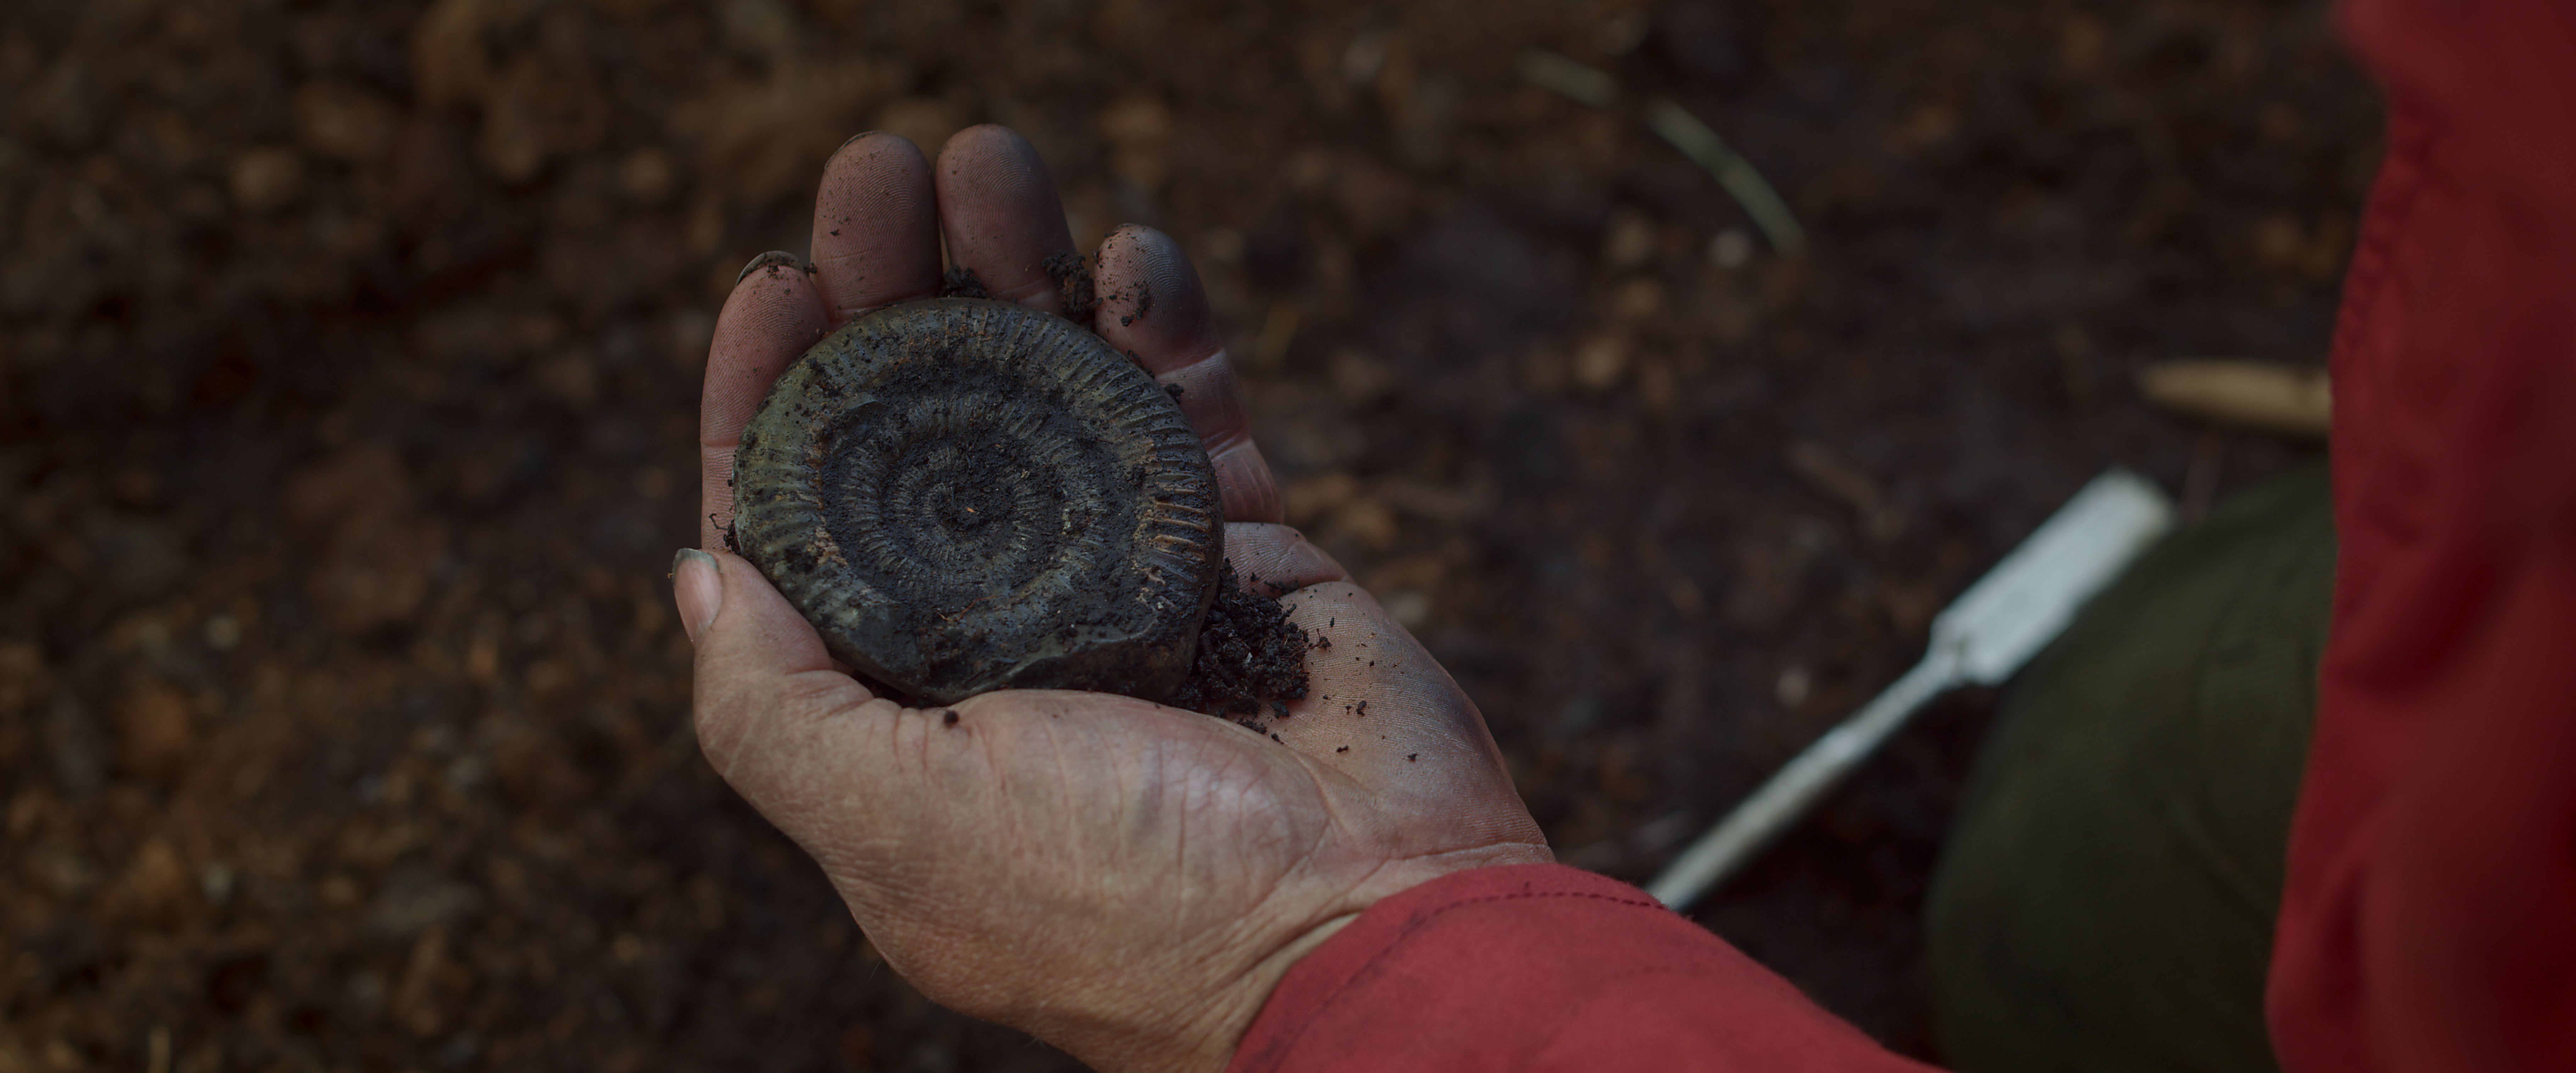 A close-up of a person with light skin holding a circular fossil in the middle of an archaeological site